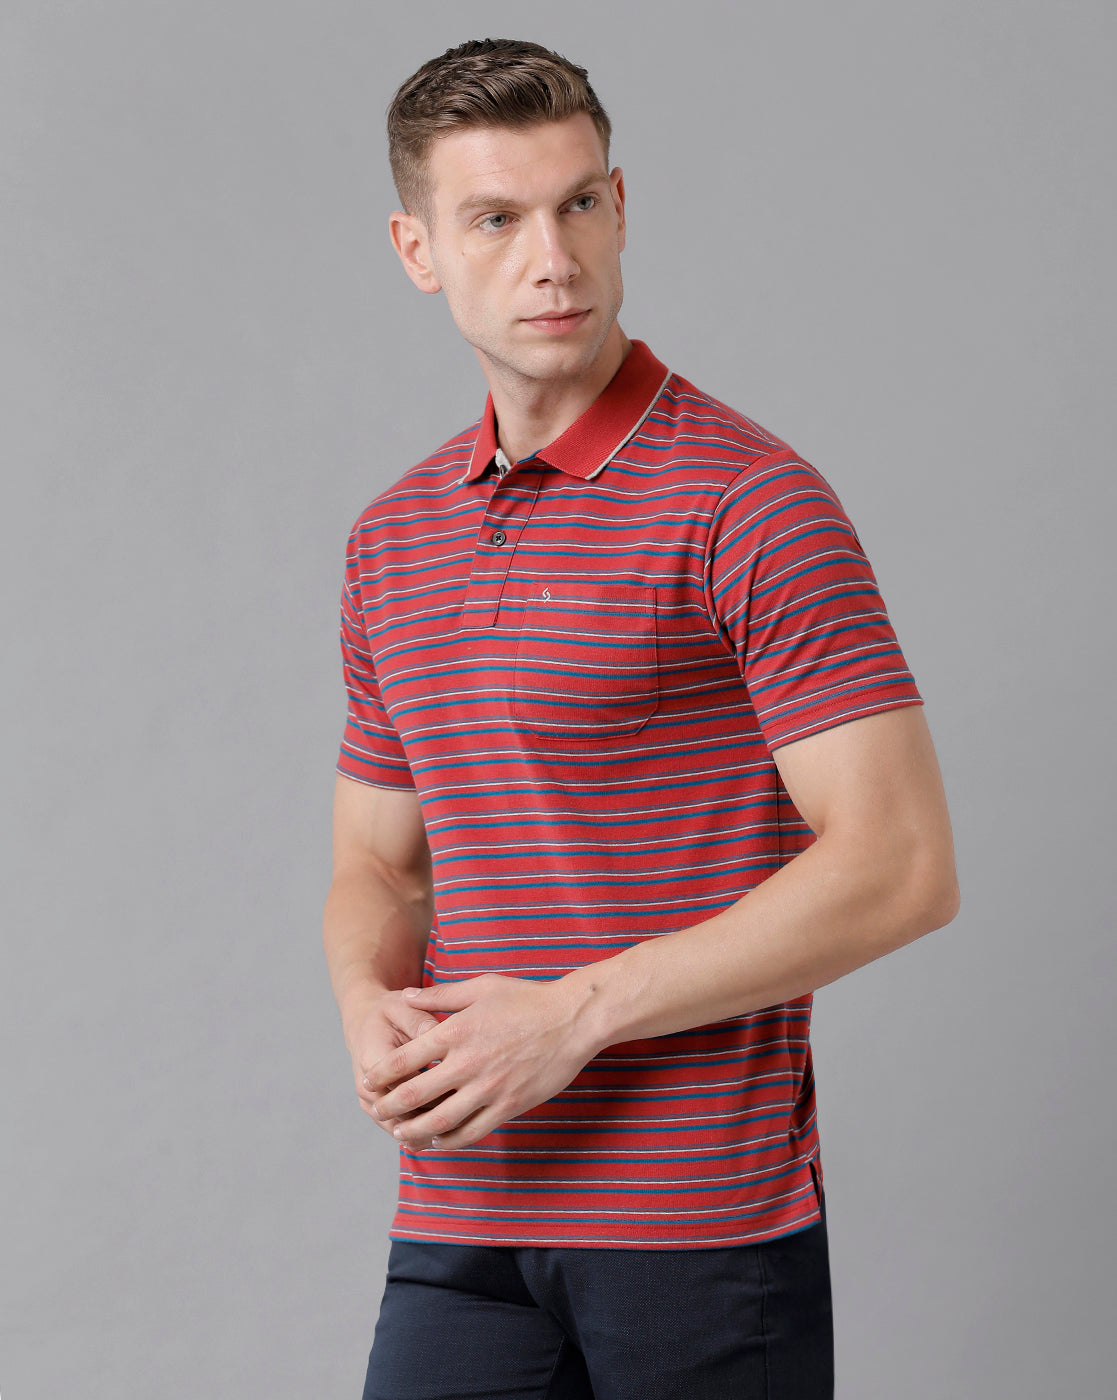 Classic Polo Men's Cotton Striped Half Sleeve Regular Fit Polo Neck Red Color T-Shirt | Feeders - 207 B